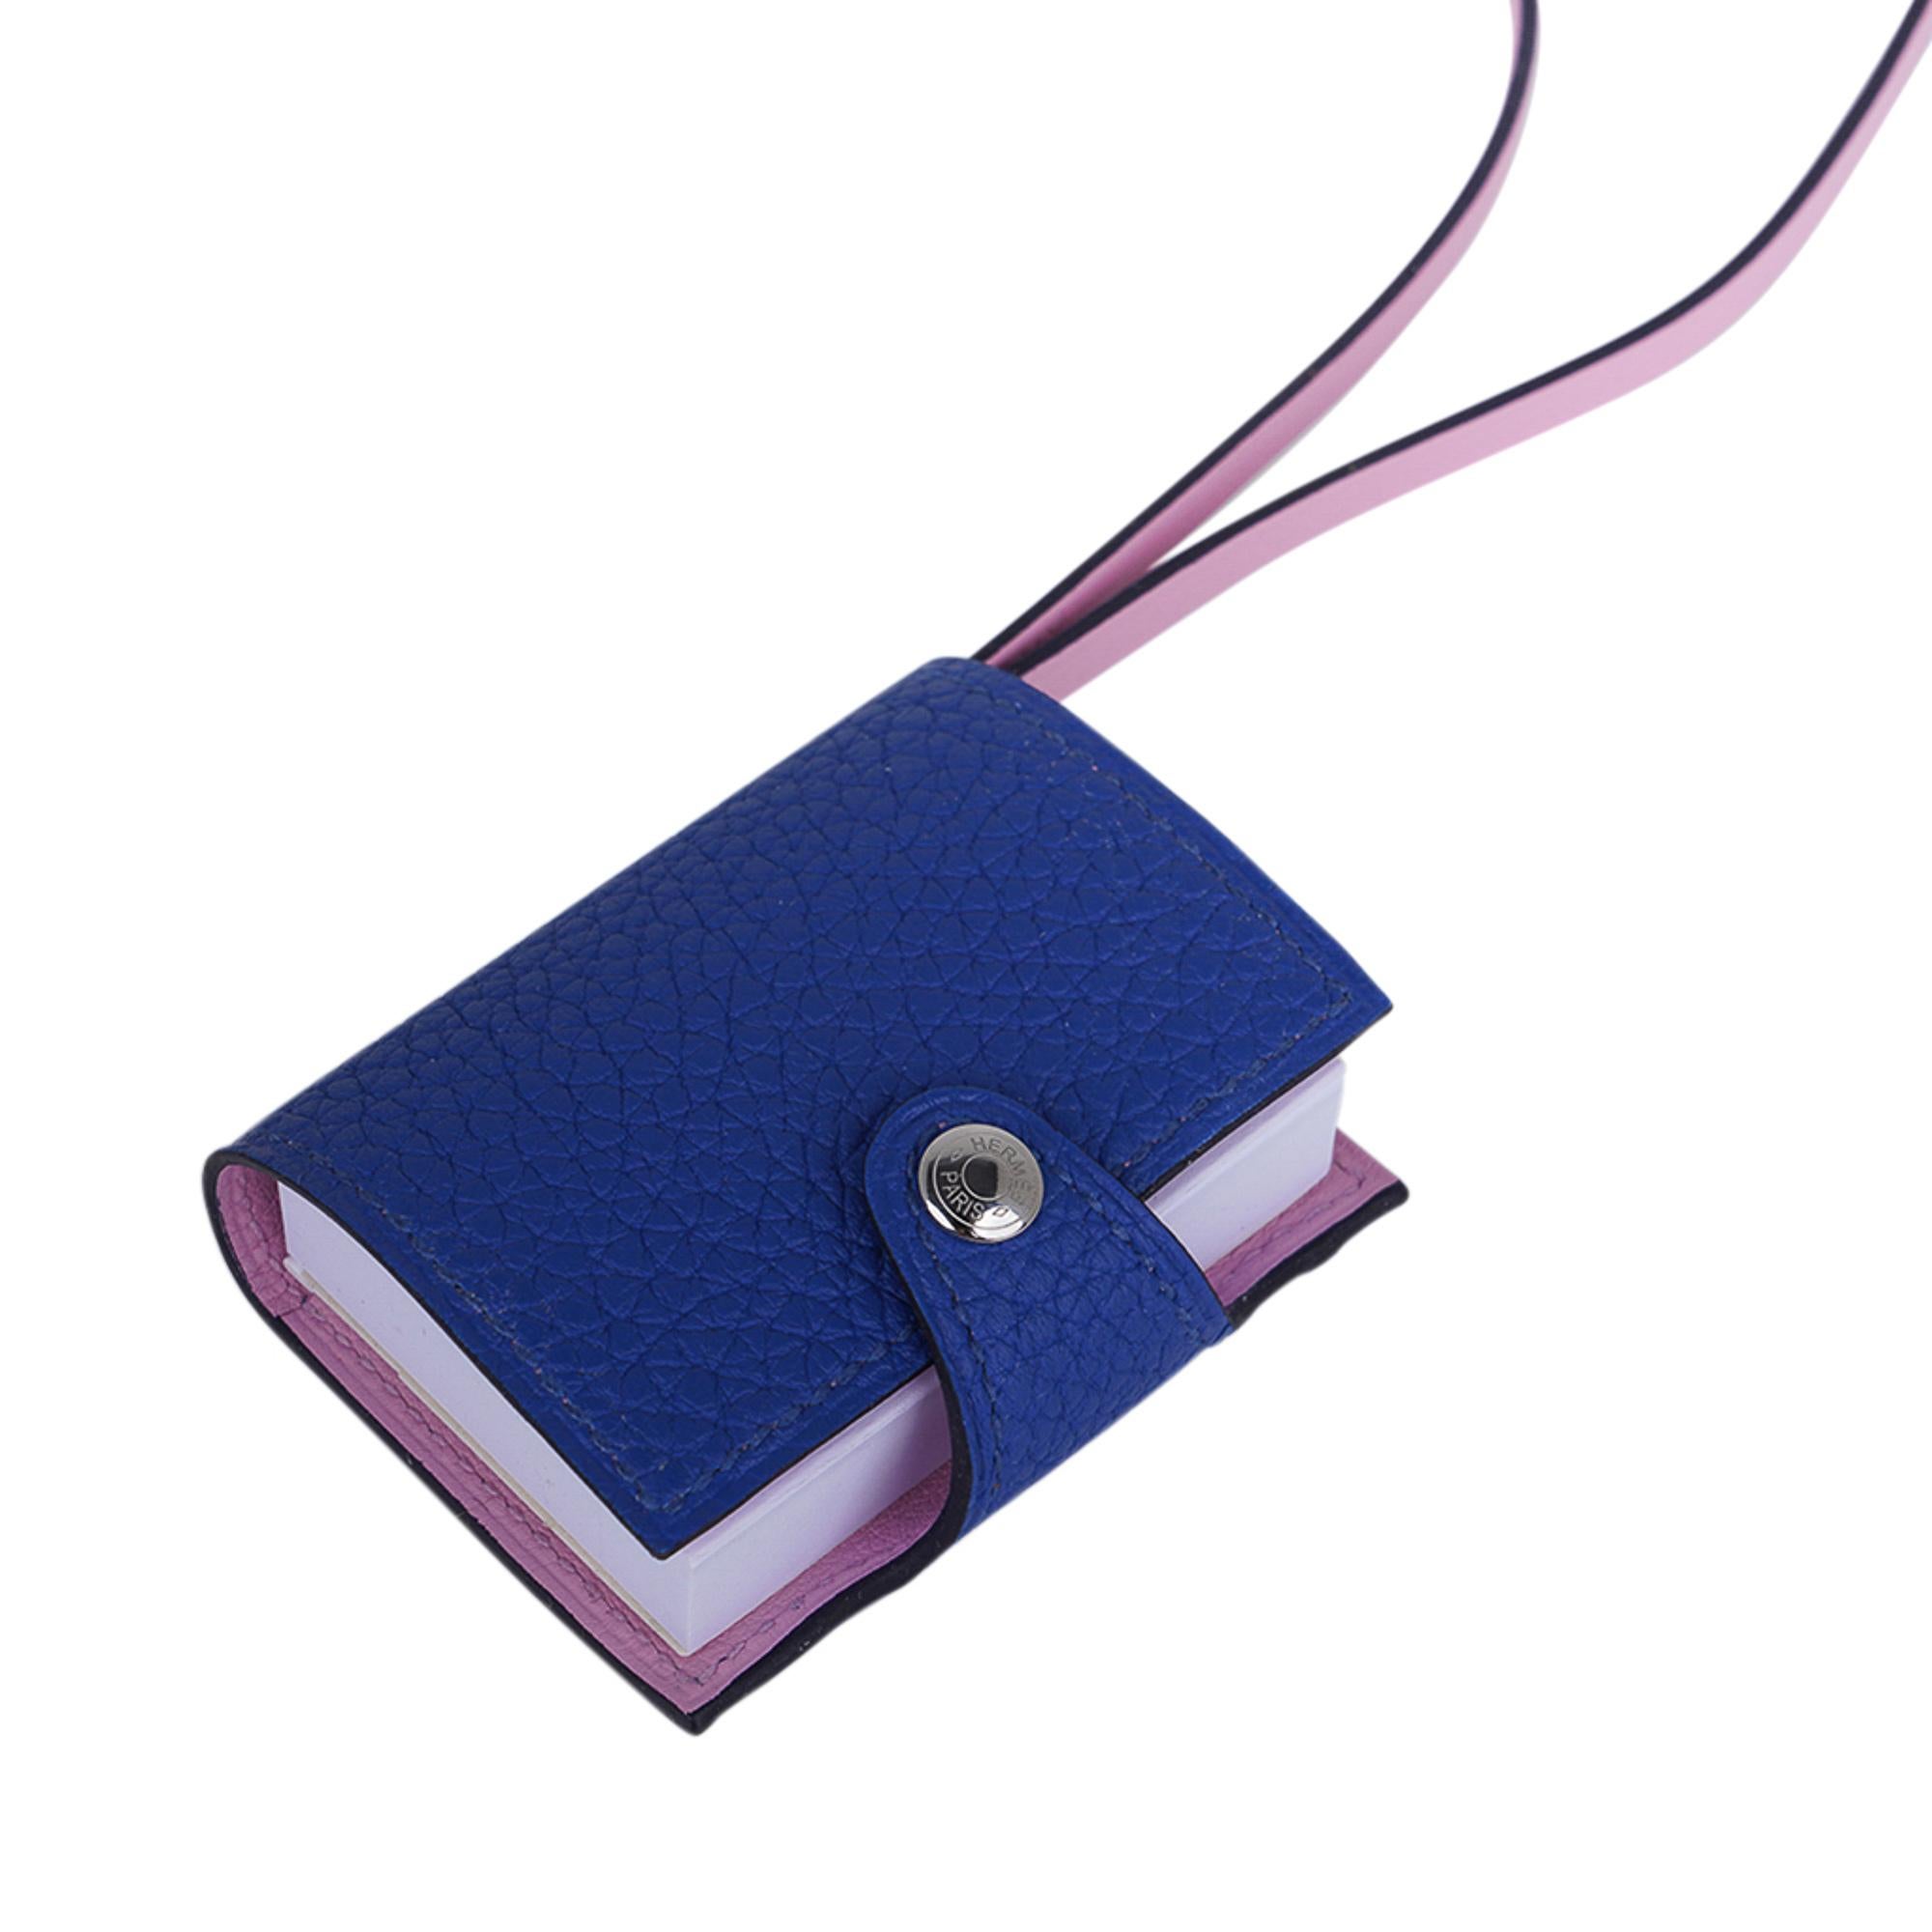 Mightychic offers an Hermes Ulysse Nano bag charm featured in Bleu de France and Mauve Sylvestre.
Bi-Color Notebook with refillable note paper.
Palladium plated hardware.
Charming and playful she easily adorns a myriad bag colours in your fabulous